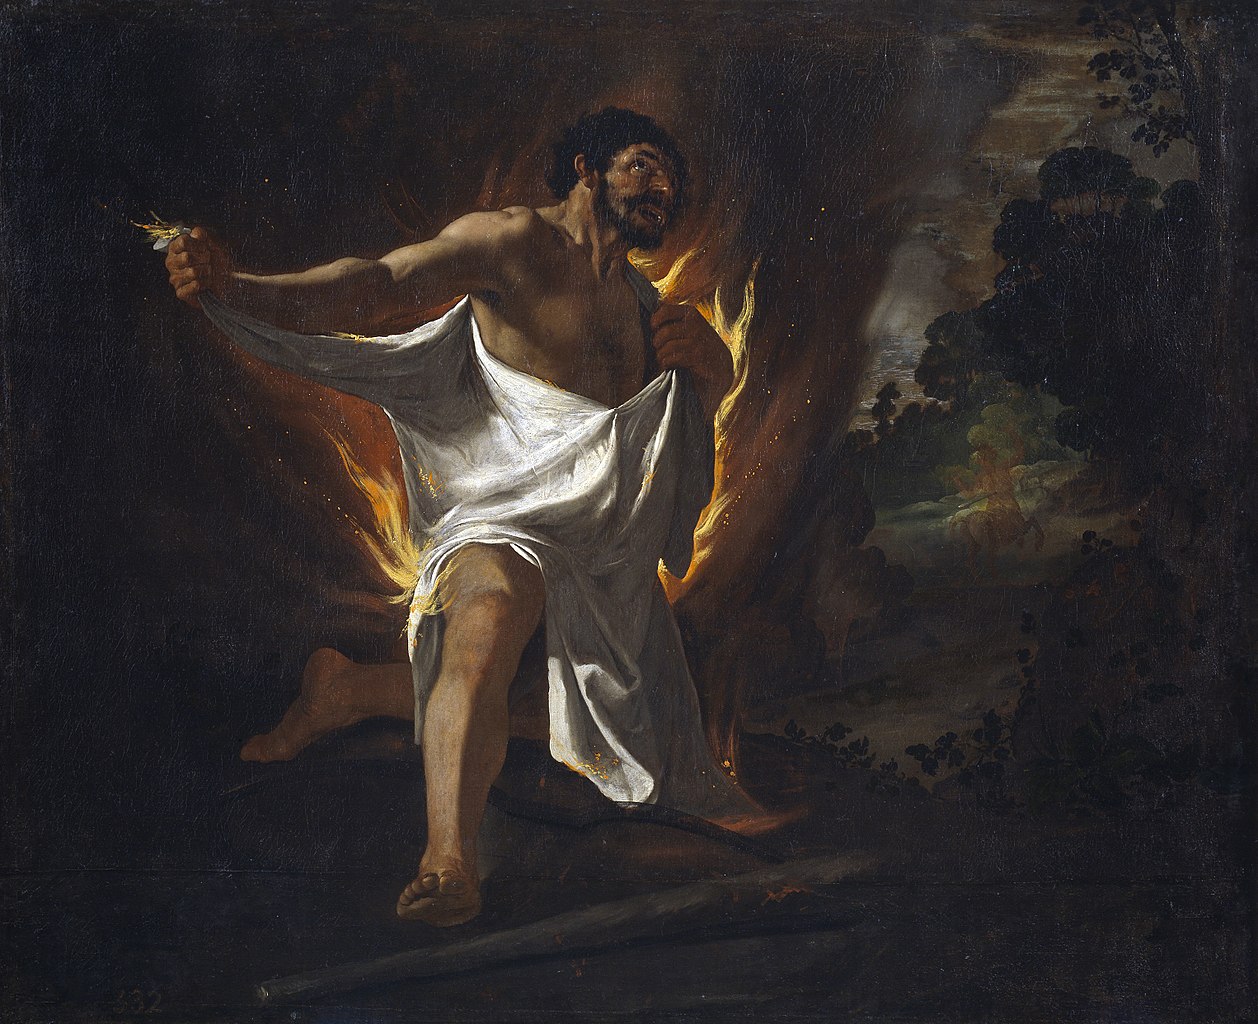 Against a background of flames, a bearded, white-skinned man looks heavenward as he tears a white shirt from his body; in the background to the right appears a rearing centaur in an indistinct forest landscape